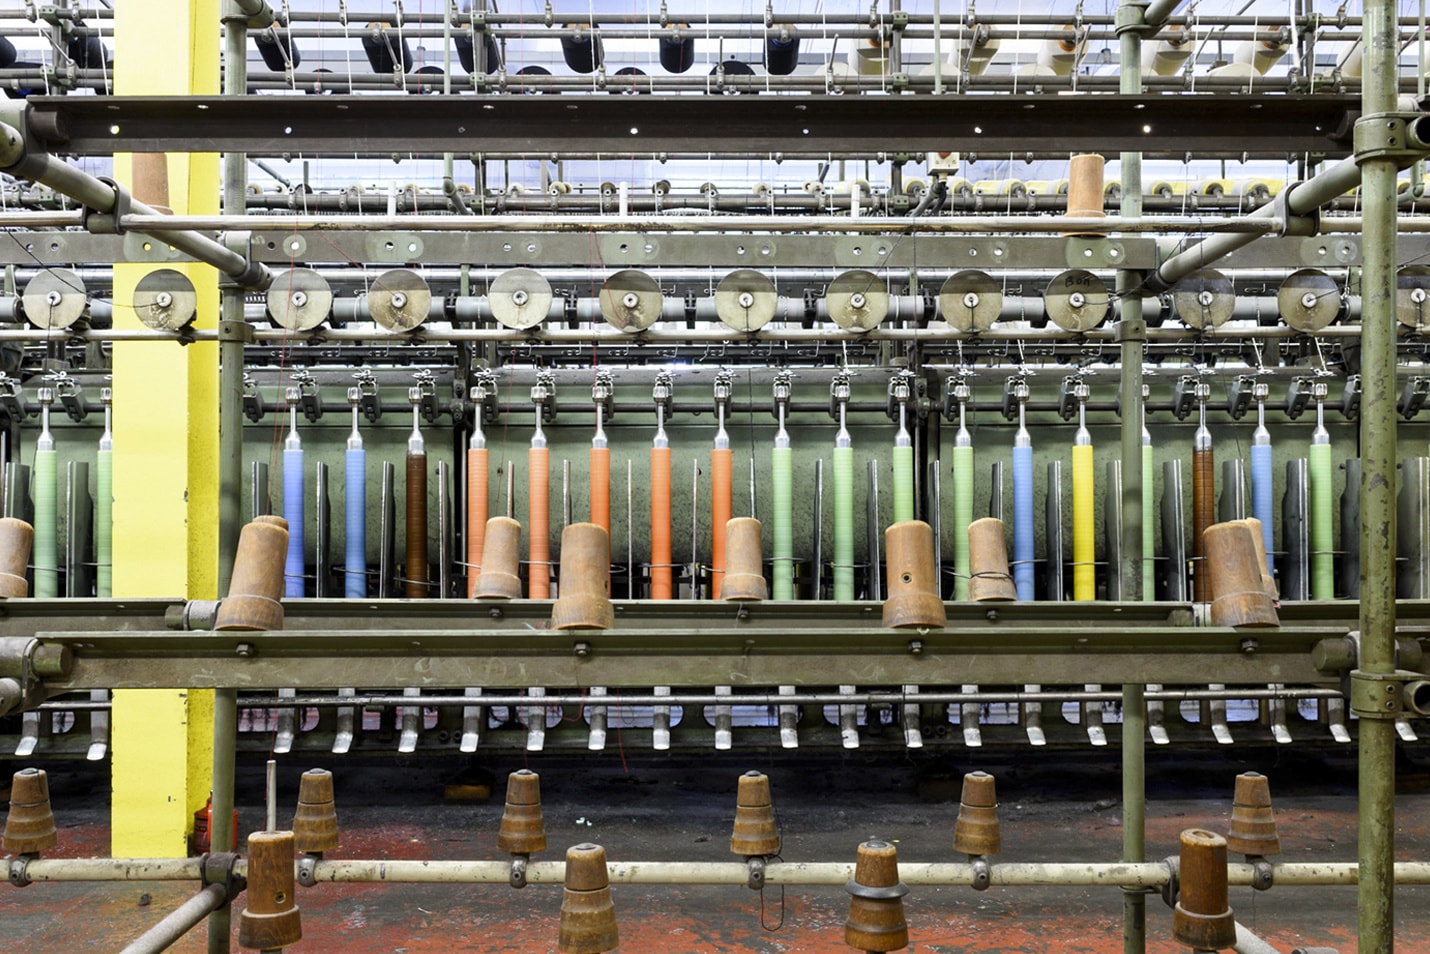 Raf Simons' Luxurious Textile Is Produced in This Danish Factory